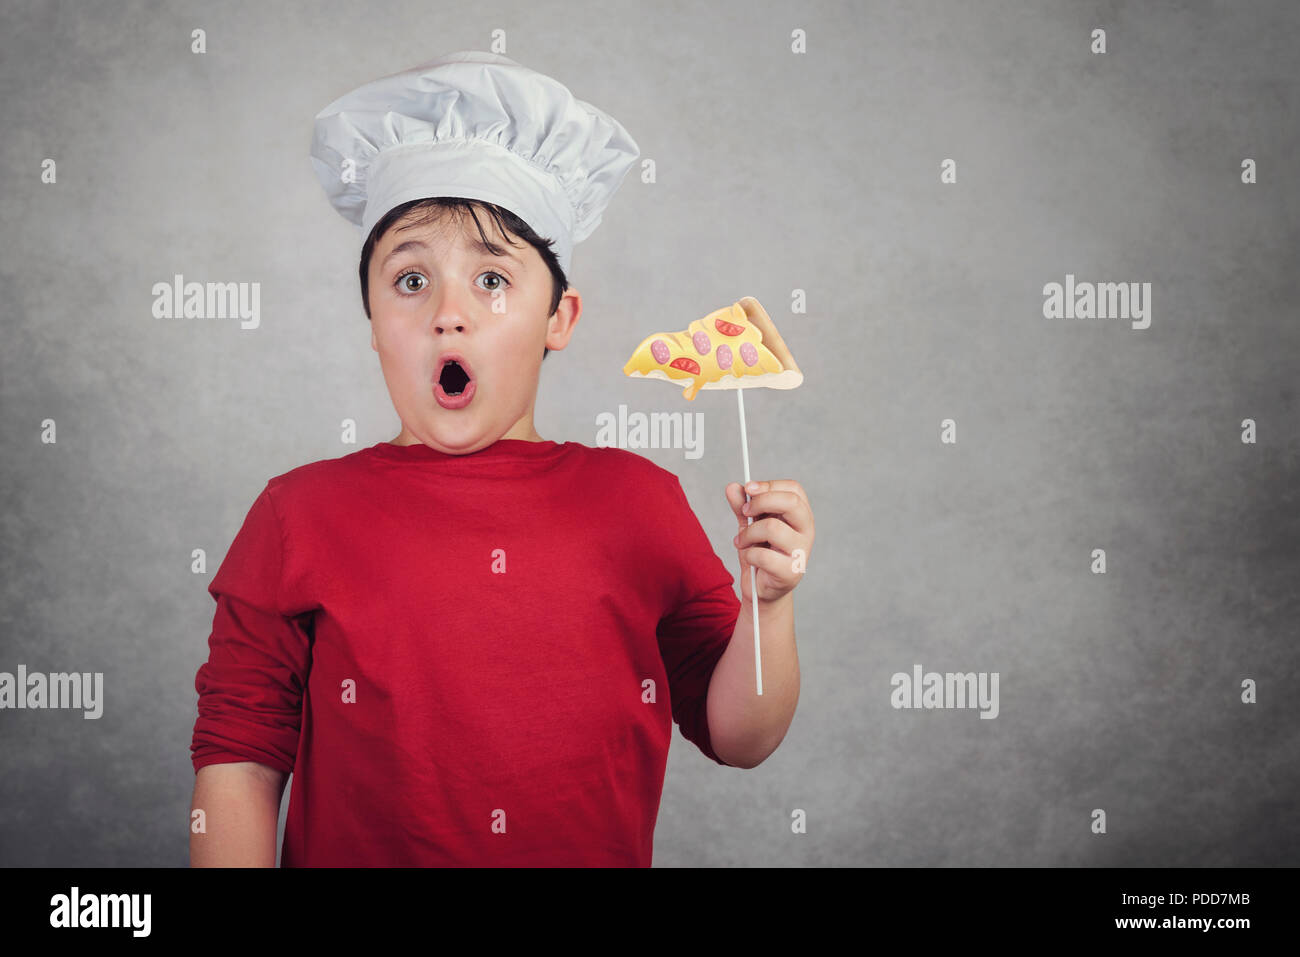 funny child eating a slice of pizza on gray background Stock Photo